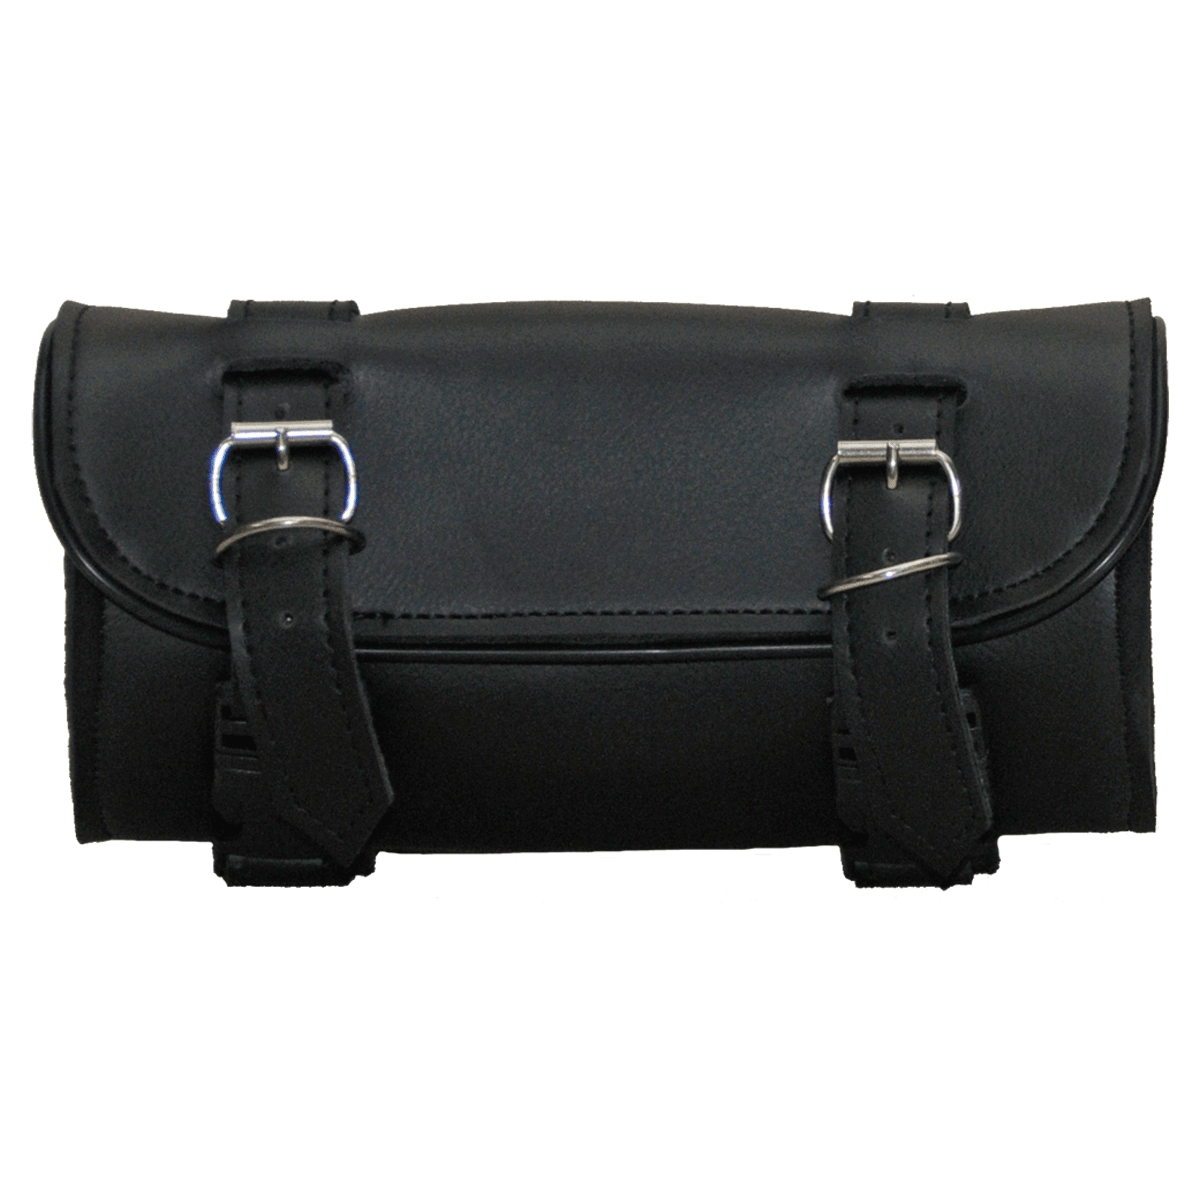 VS111 2 Strap Plain Tool Bag with Quick Releases